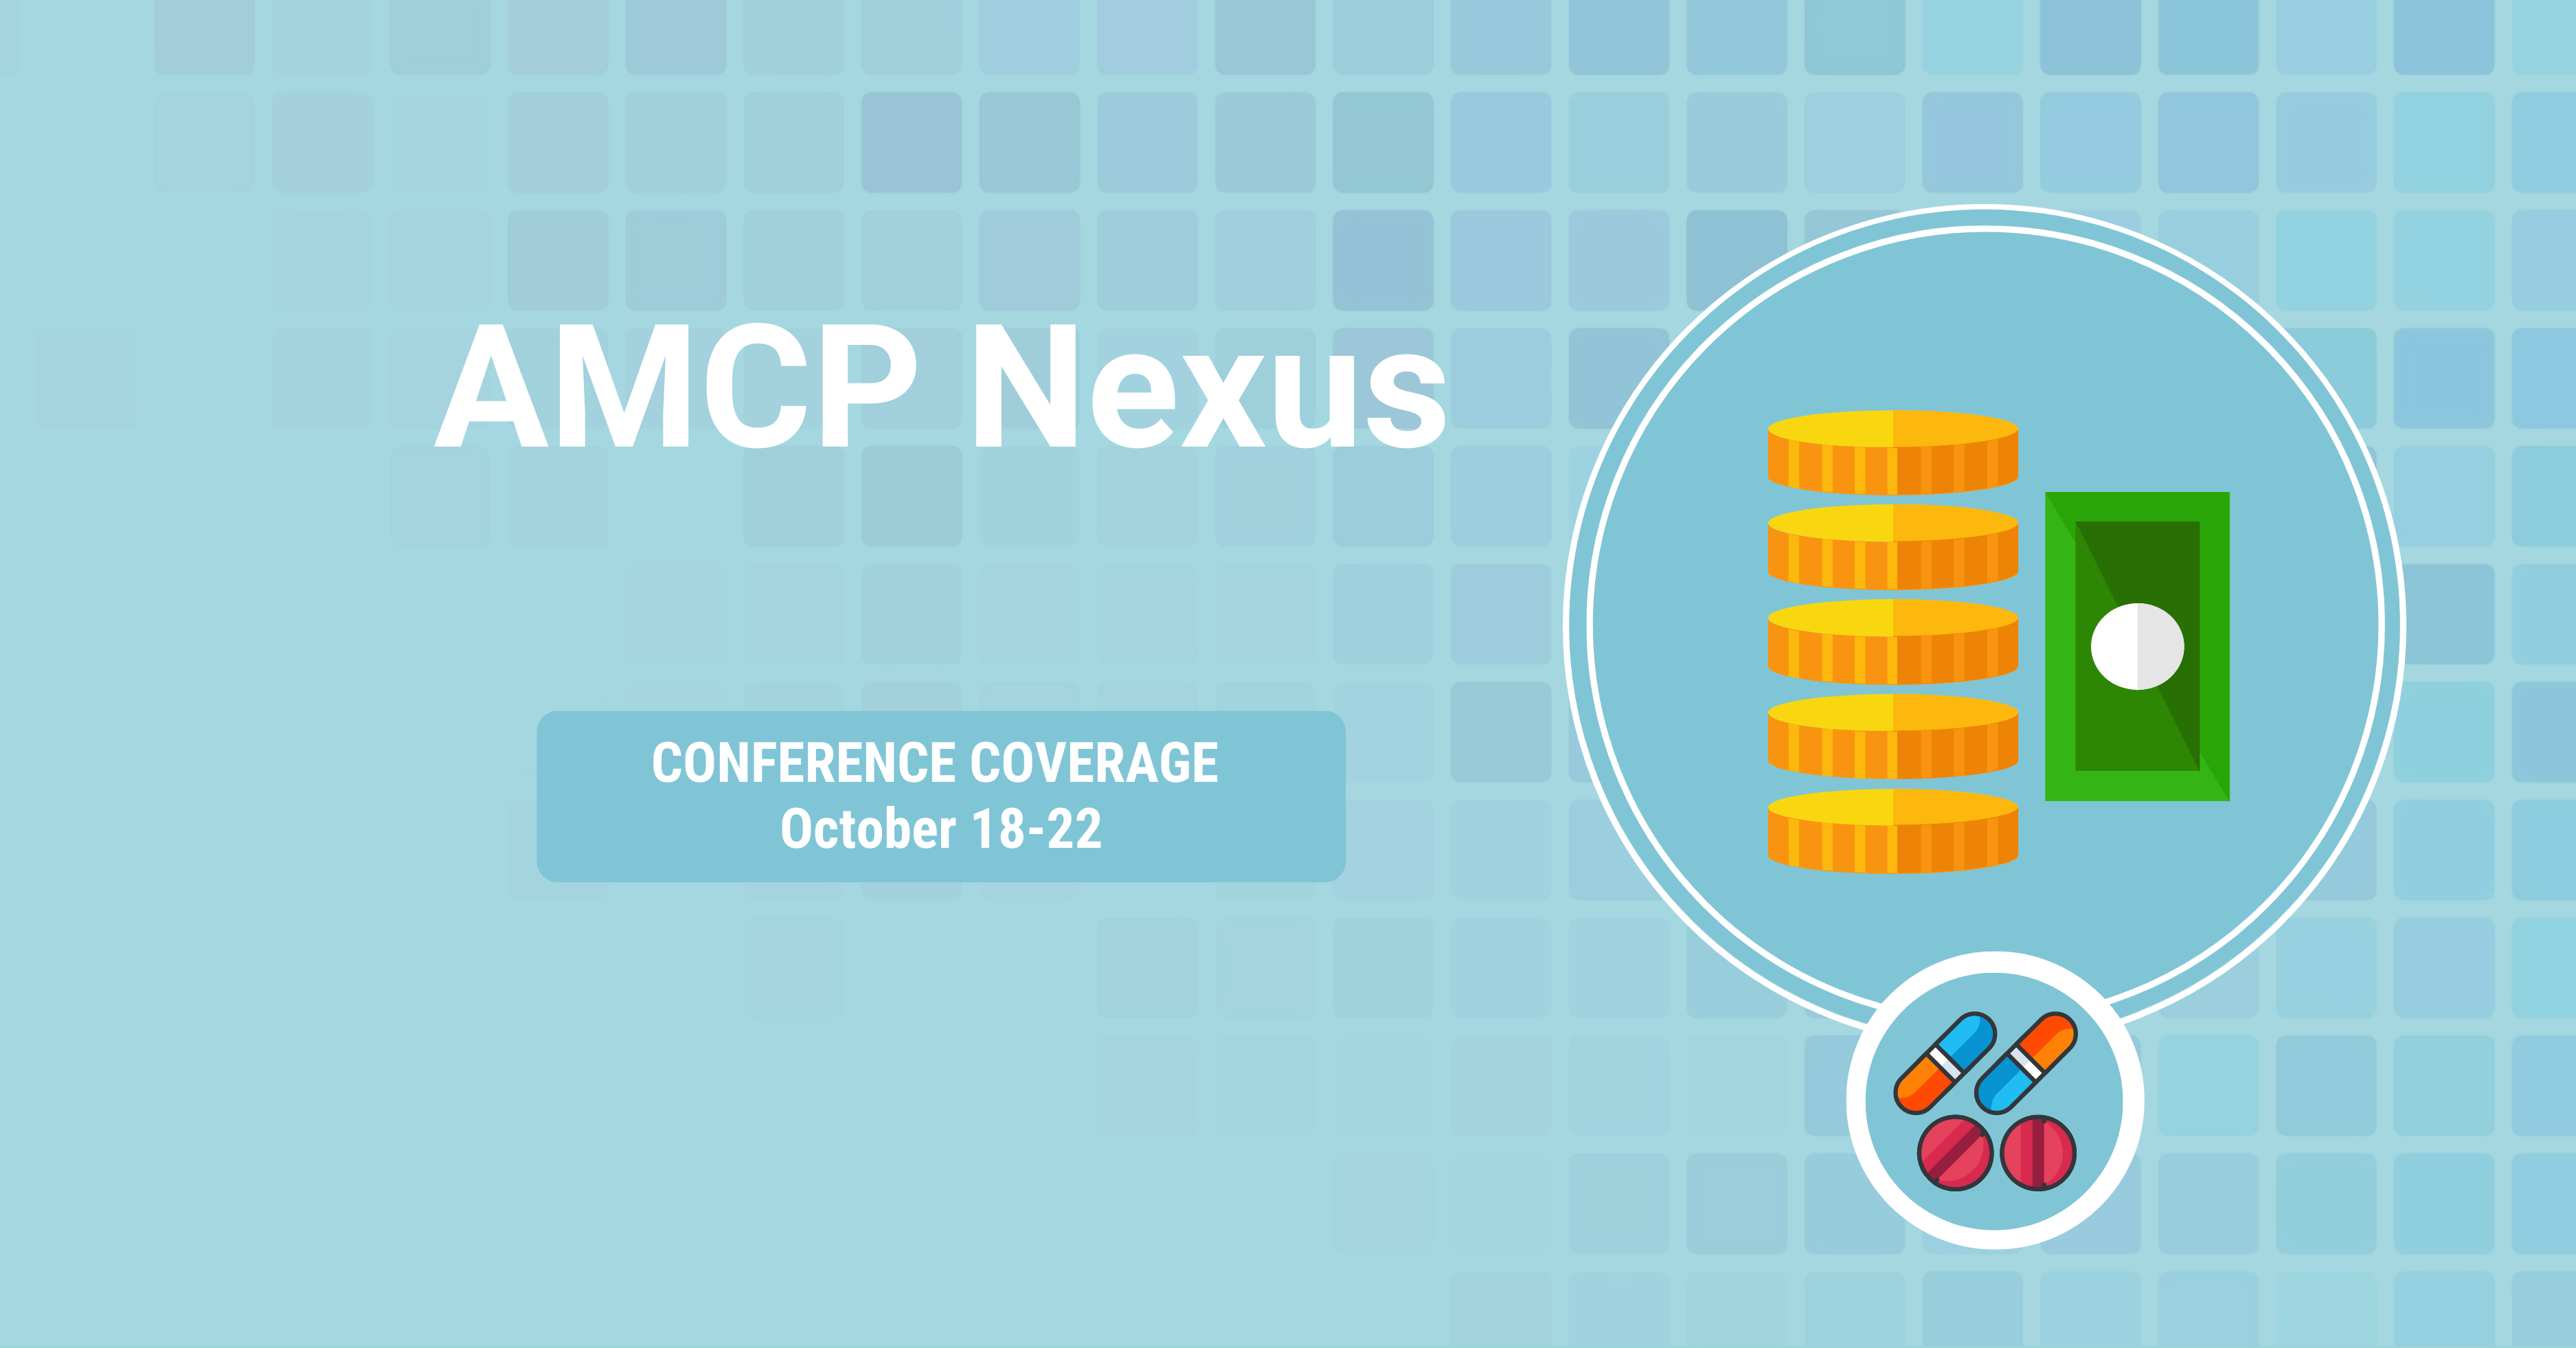 AMCP Nexus Sessions Will Focus on Drug Costs and Addressing Health Disparities